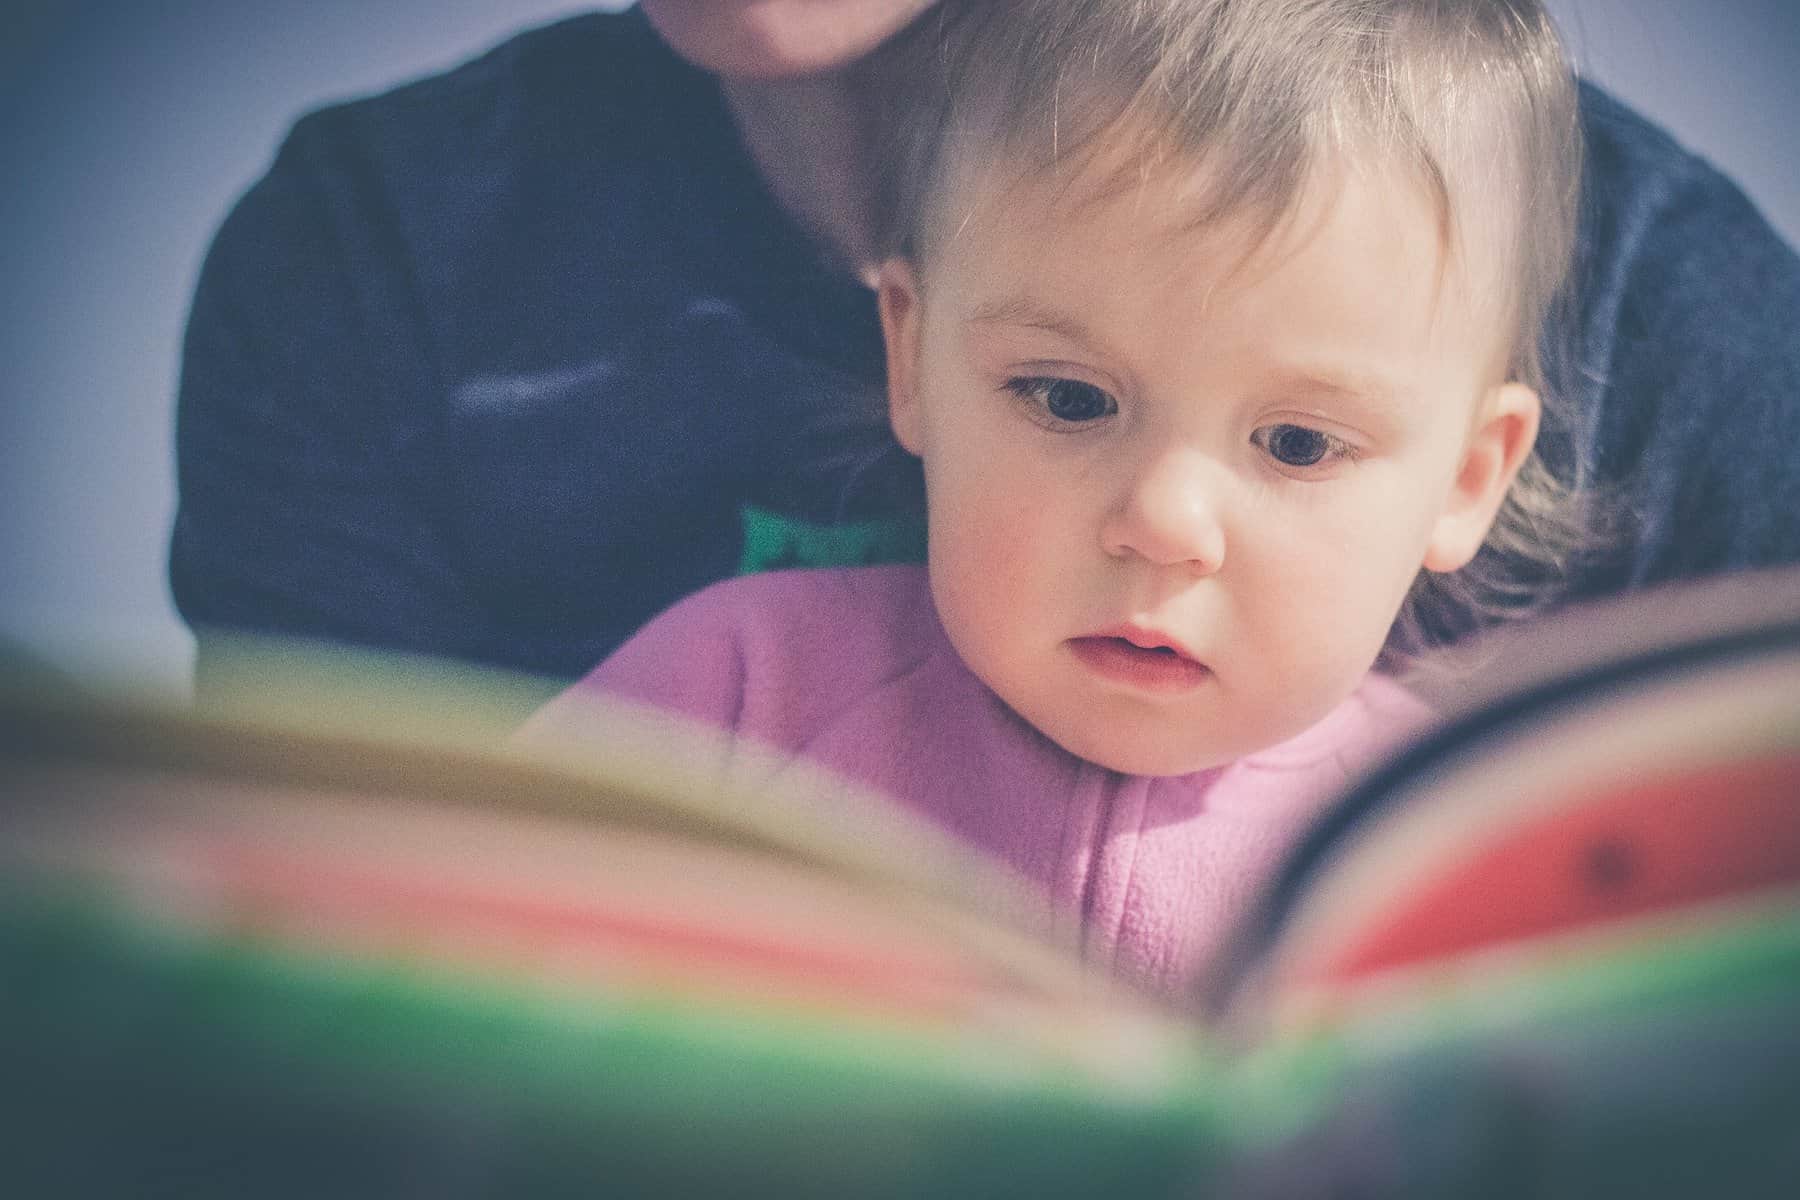 A toddler sits on an adults lap as they look at an open book that is out of focus and between the camera and readers.